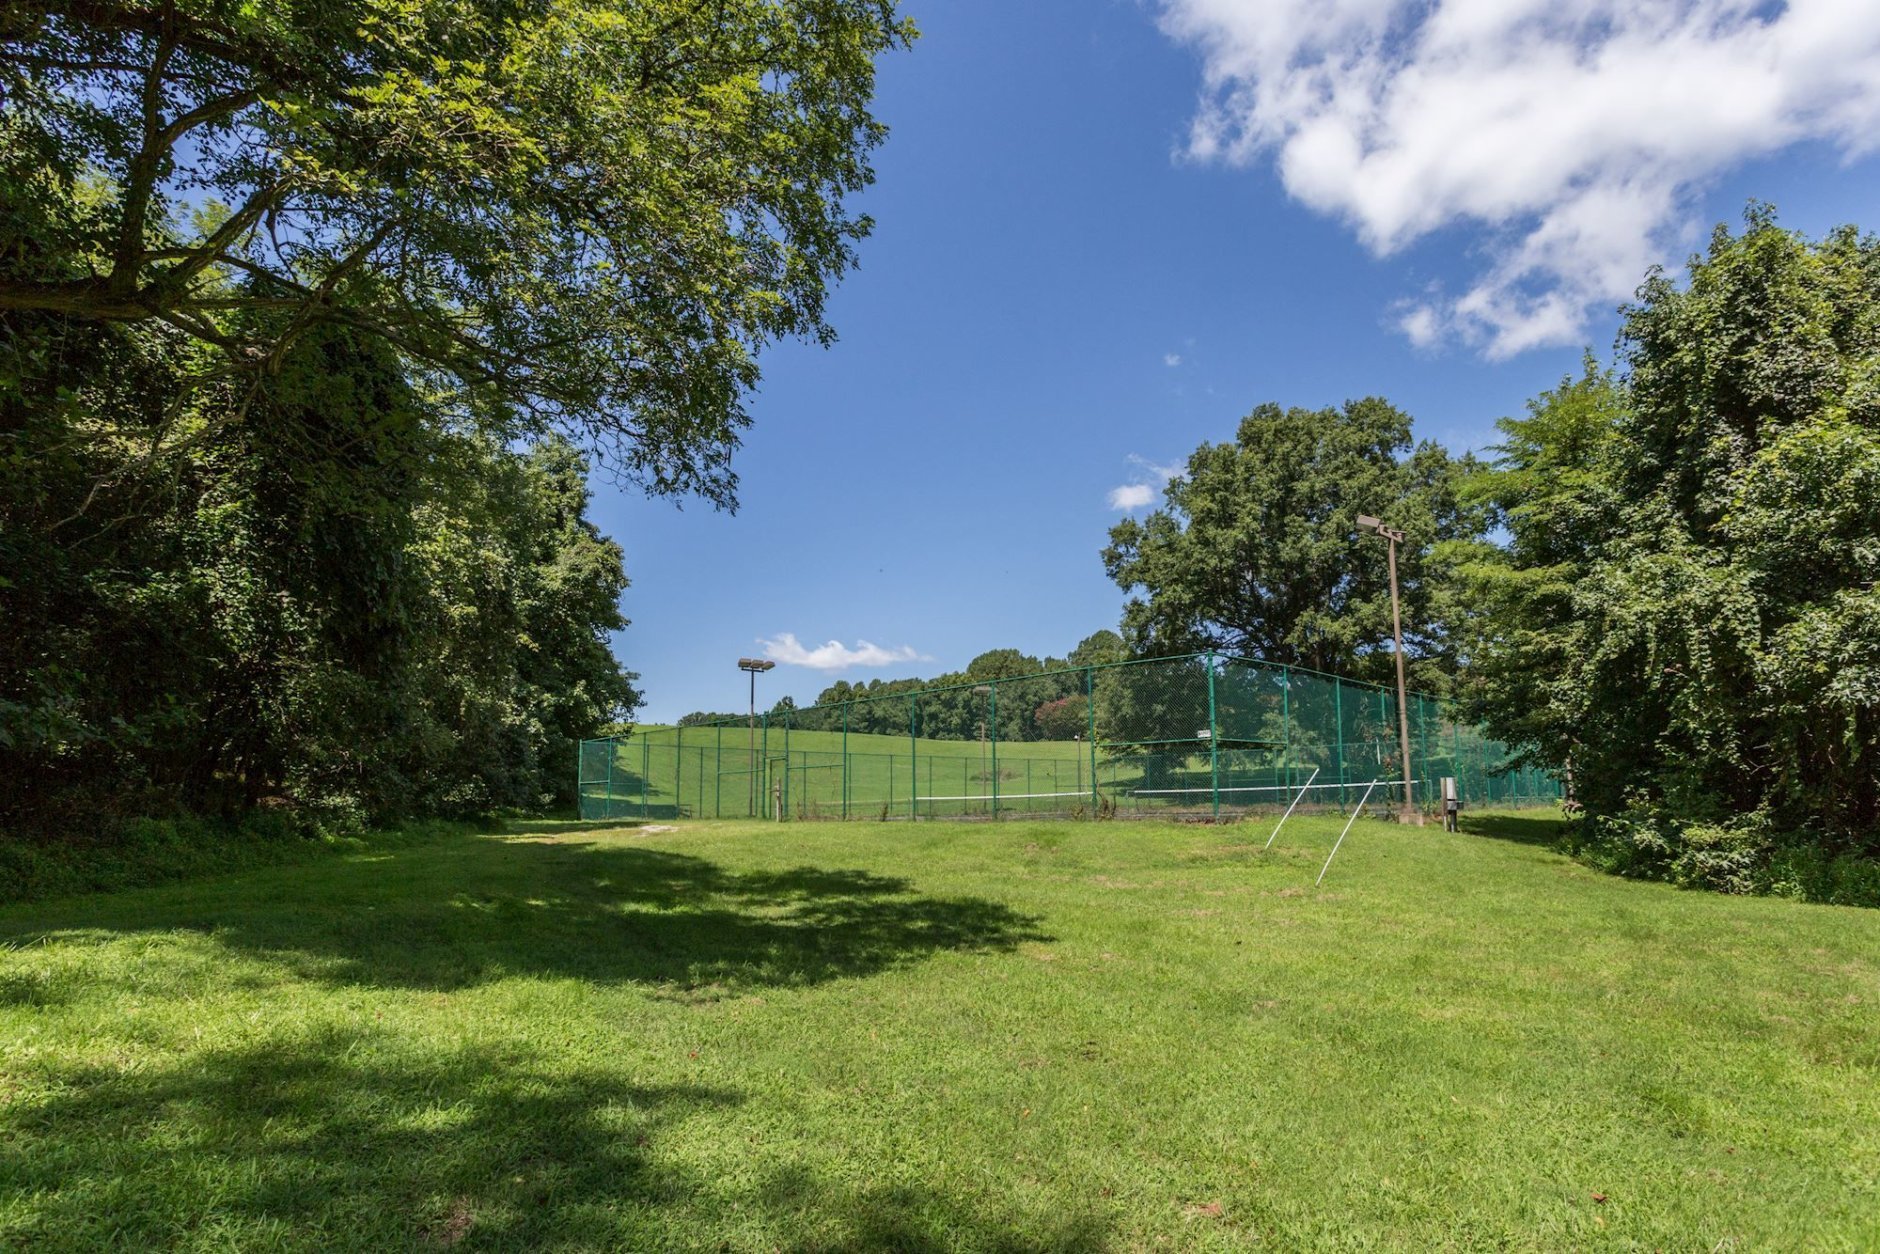 The tennis courts of Tom Clancy's estate. (Courtesy Cummings & Co. Realtors)